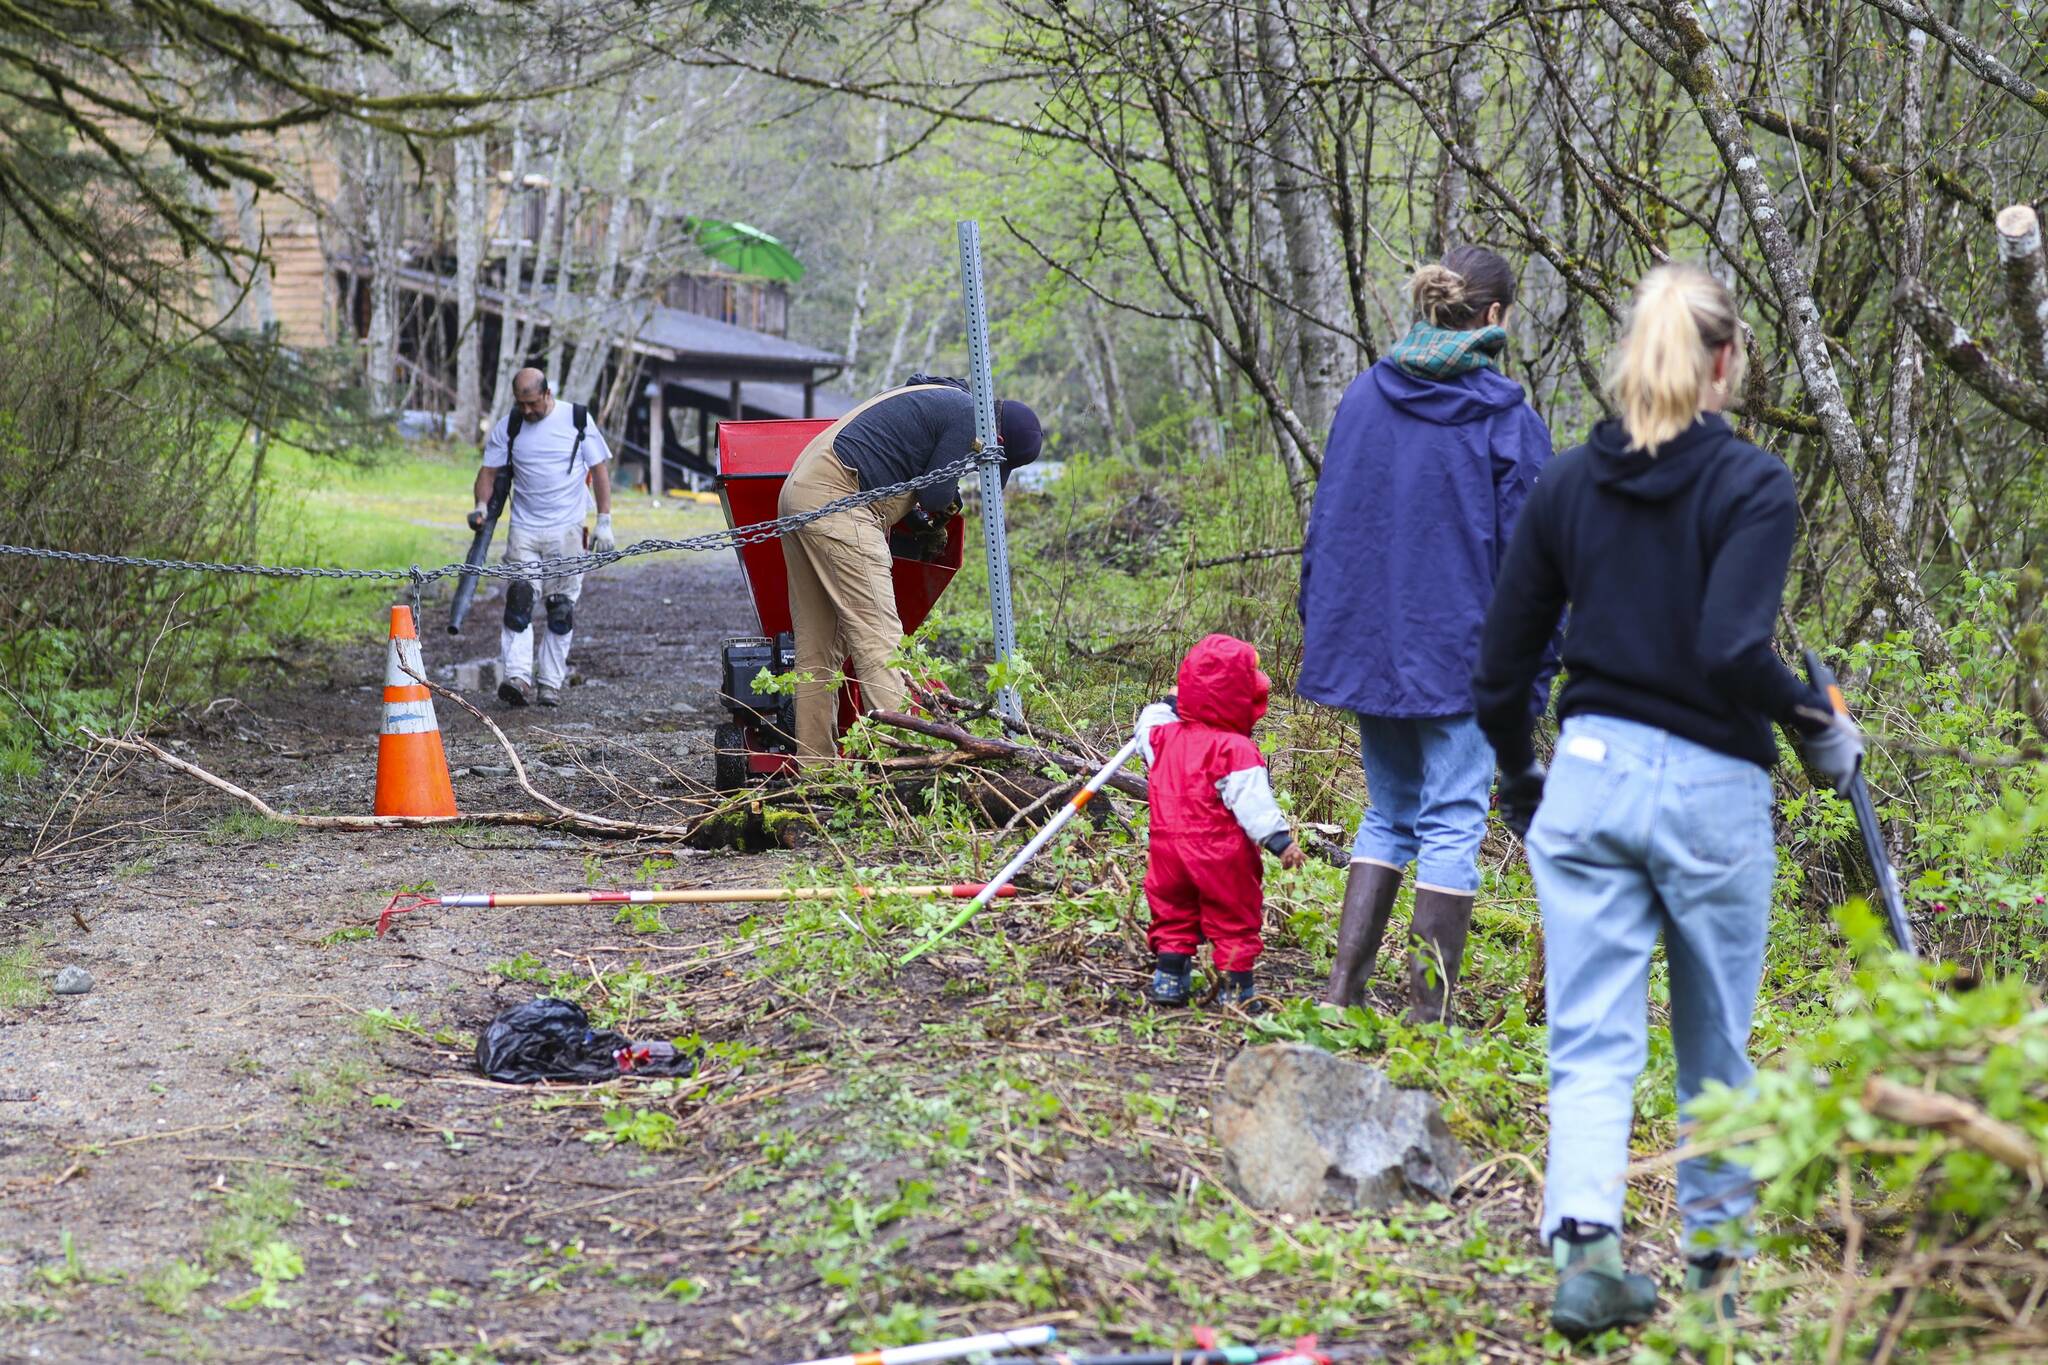 Michael S. Lockett / Juneau Empire 
Volunteers clear deadwood and undergrowth as part of the cleanup of the cemetery near Lawson Creek on May 14, 2022.